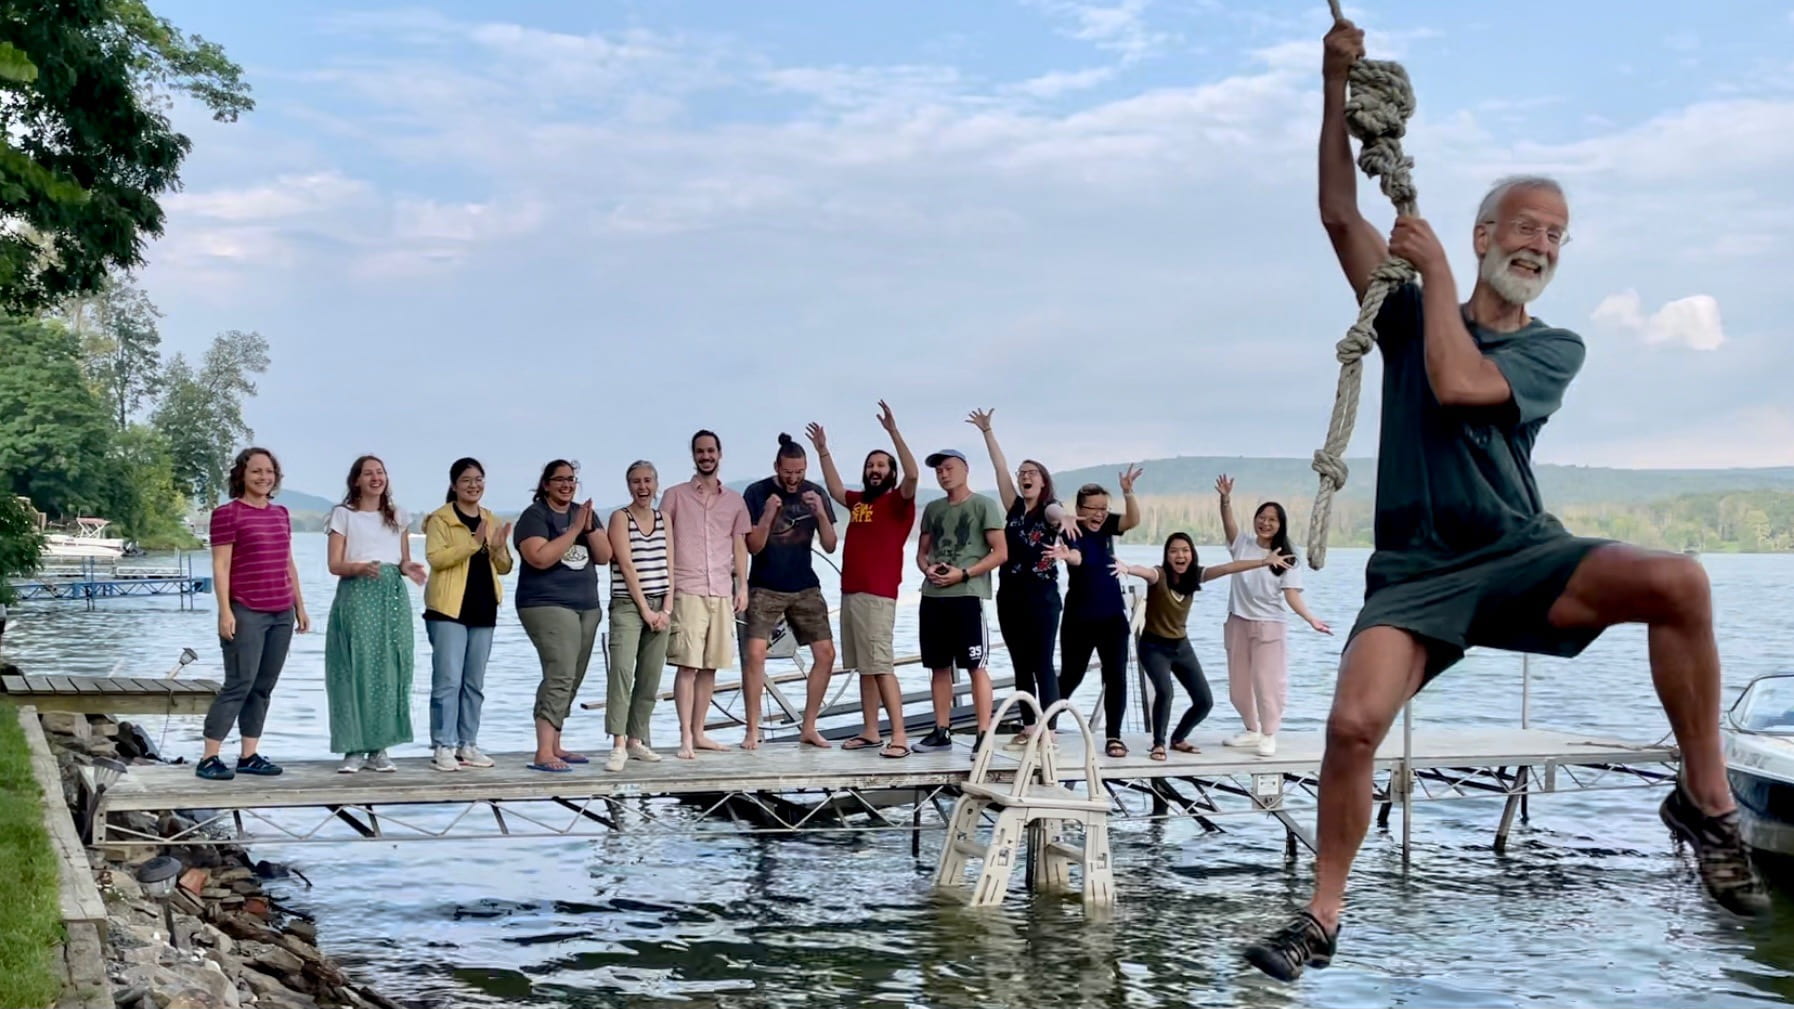 Lab members cheer from the dock while Andy Clark swings over the lake from a rope.